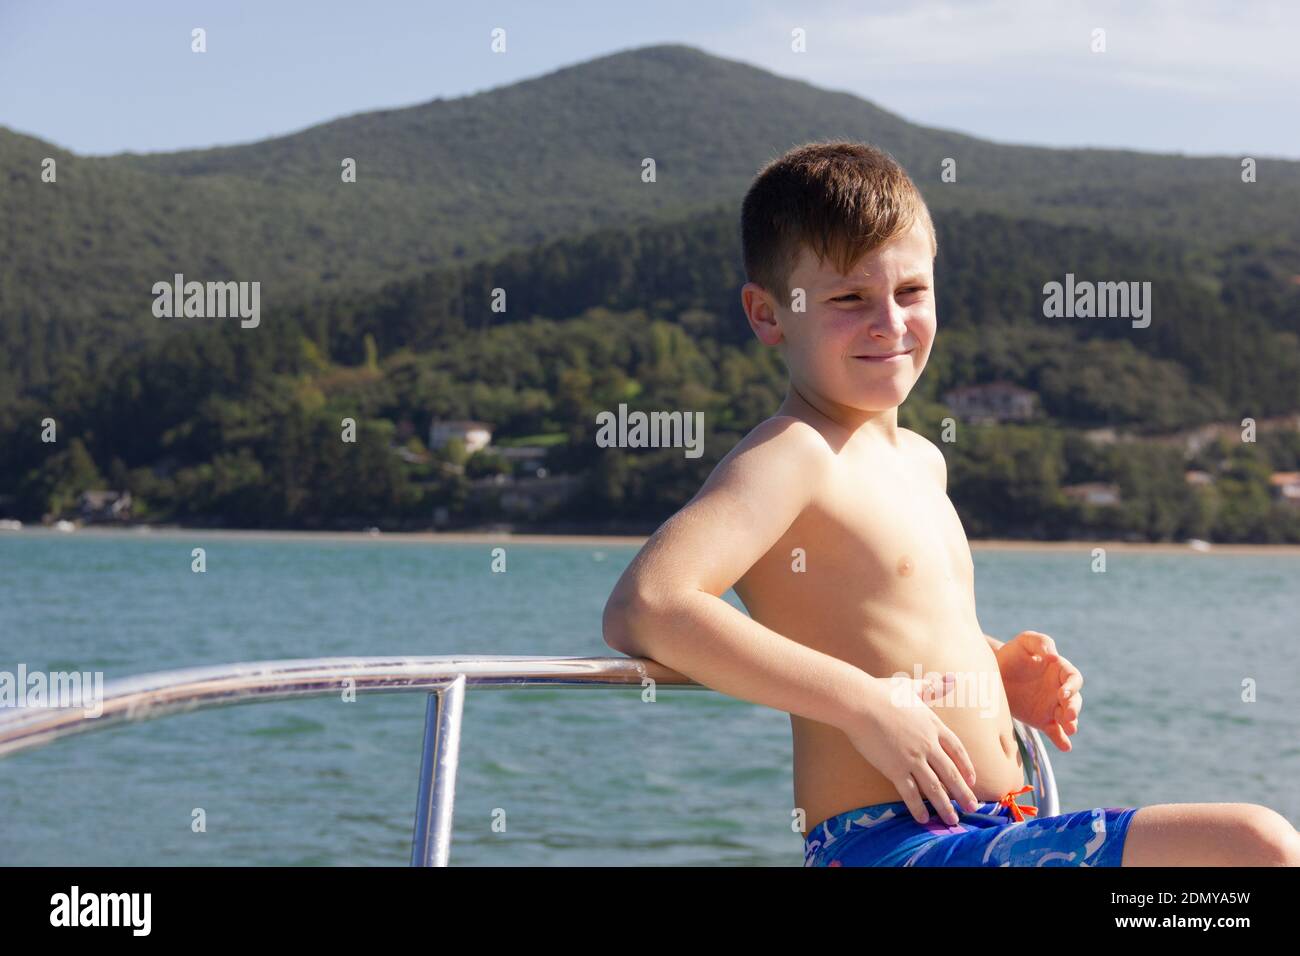 White skinny boy on blue swimming trunks leans on boat railing by the sea with strong sun on chest. Child sunbathing sitting on small vessel prow Stock Photo